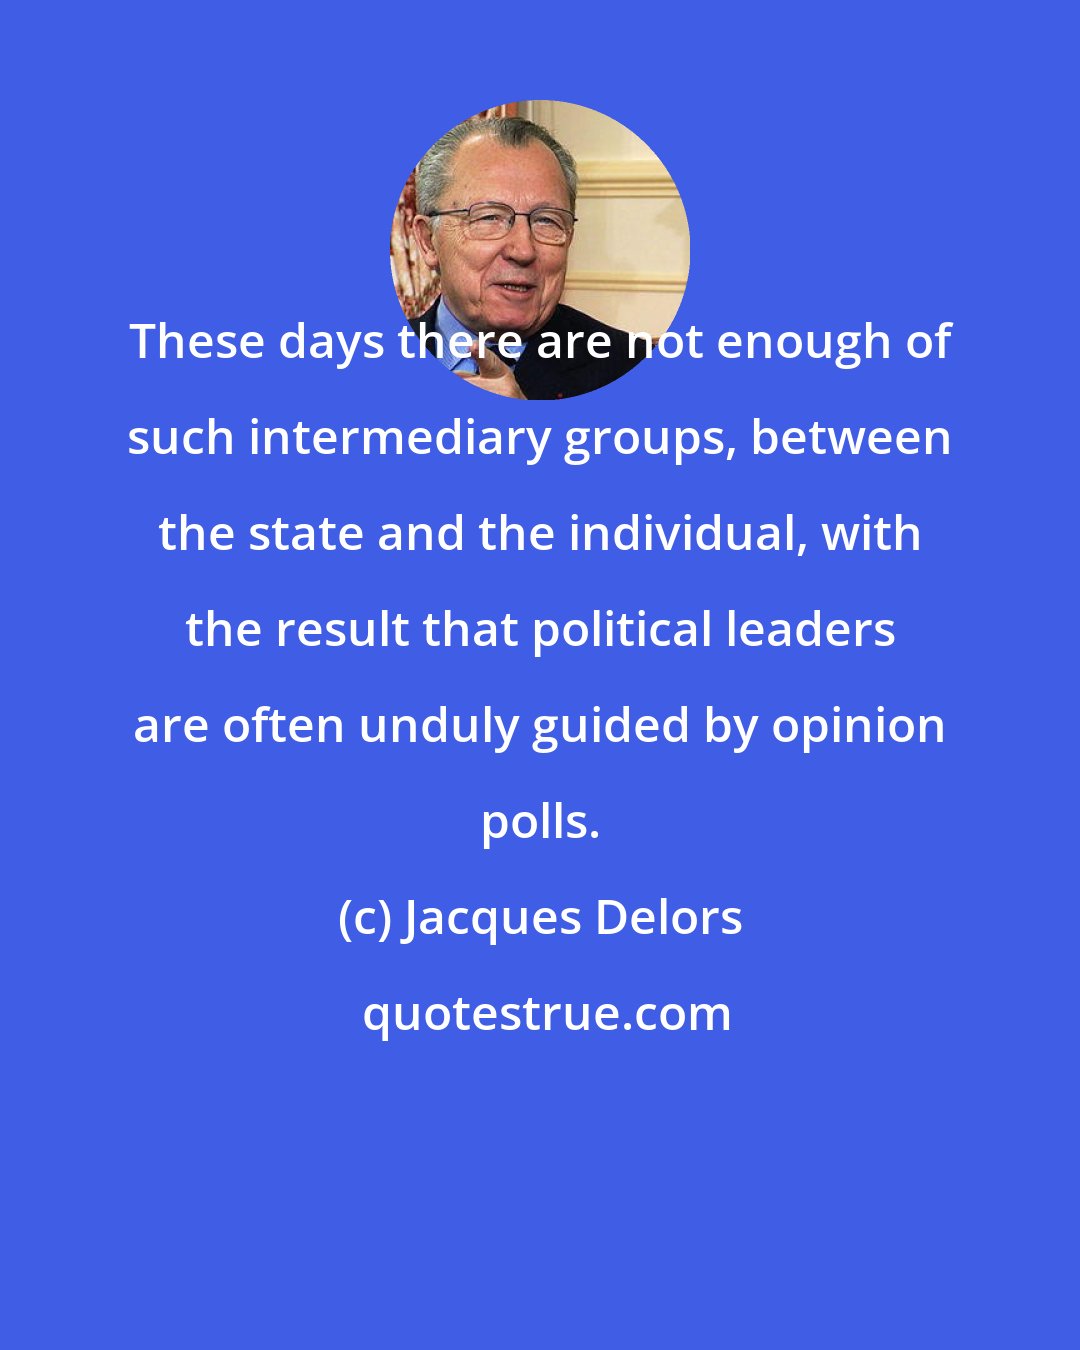 Jacques Delors: These days there are not enough of such intermediary groups, between the state and the individual, with the result that political leaders are often unduly guided by opinion polls.